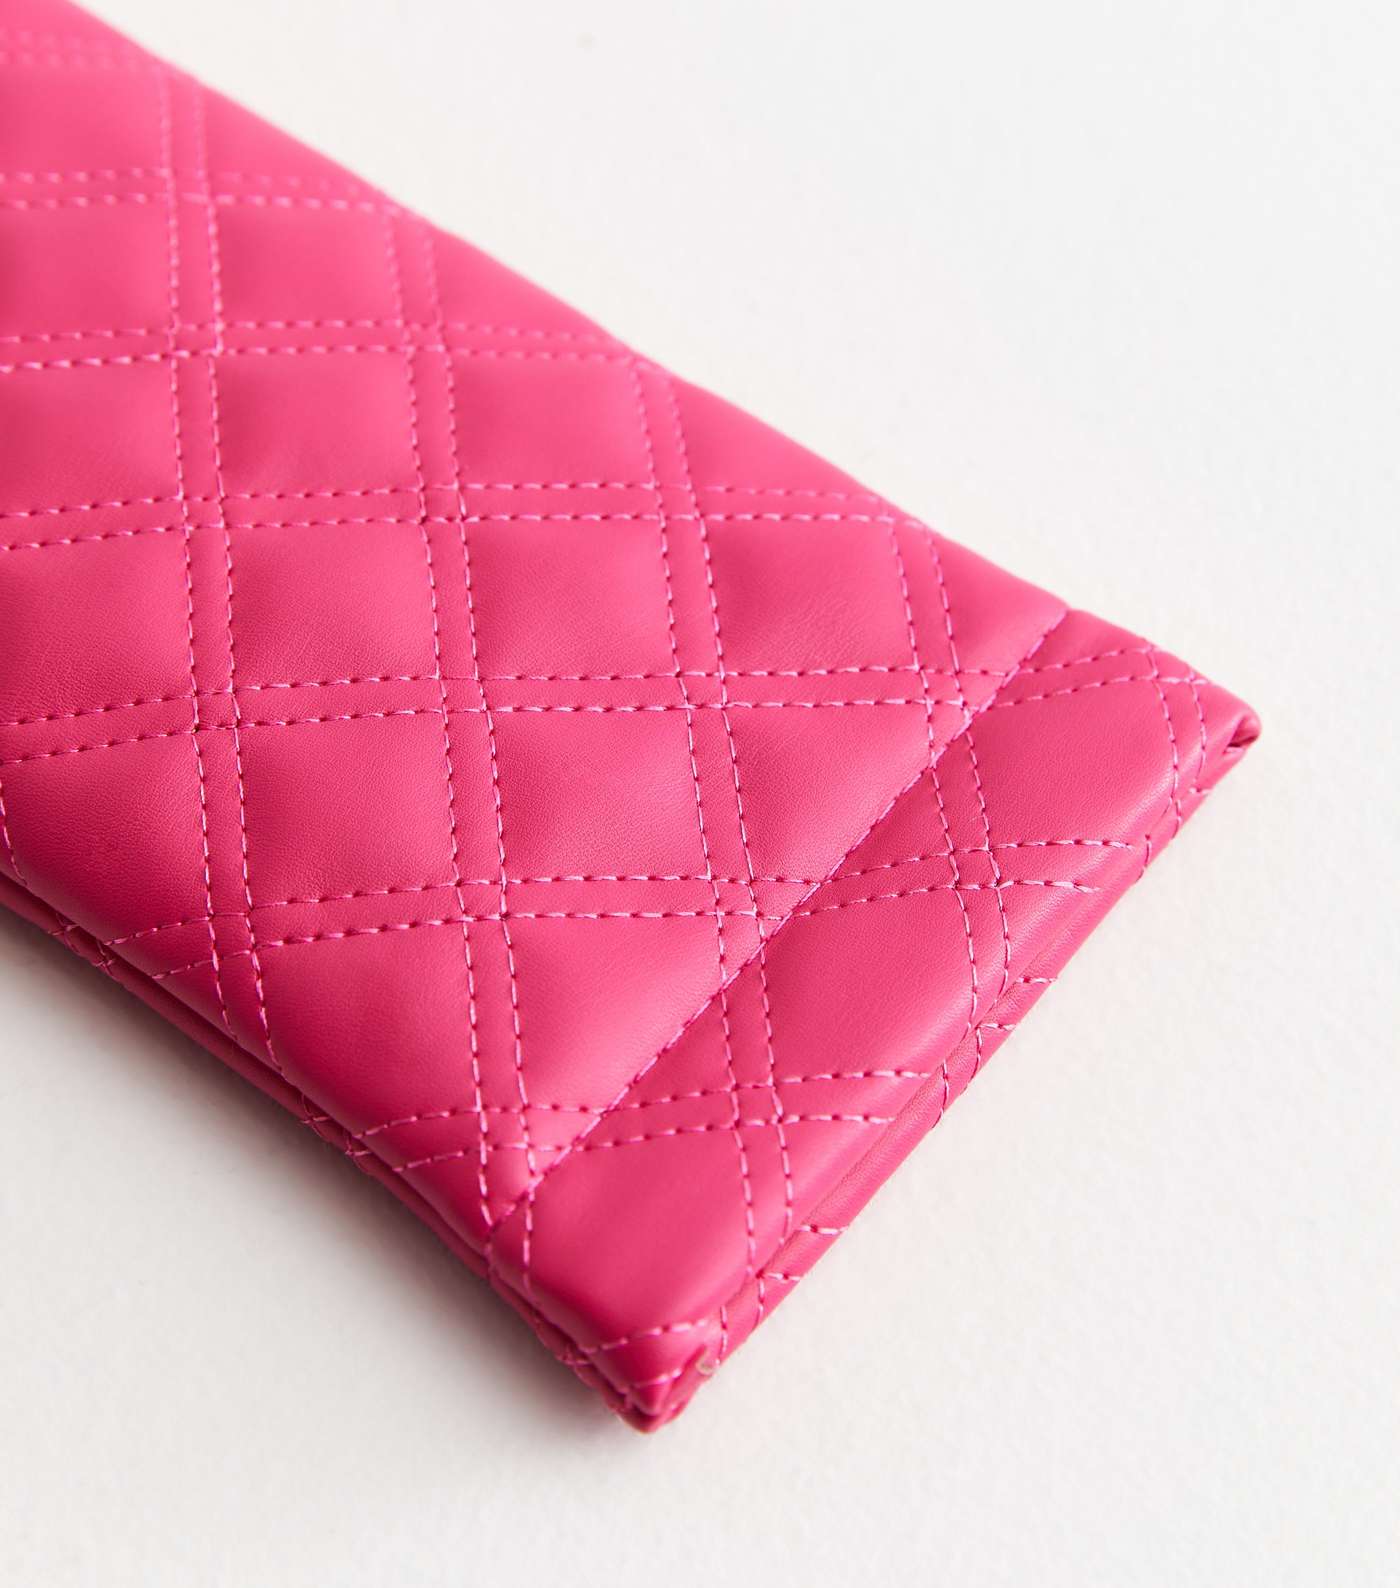 Bright Pink Quilted Leather-Look Sunglasses Case Image 2